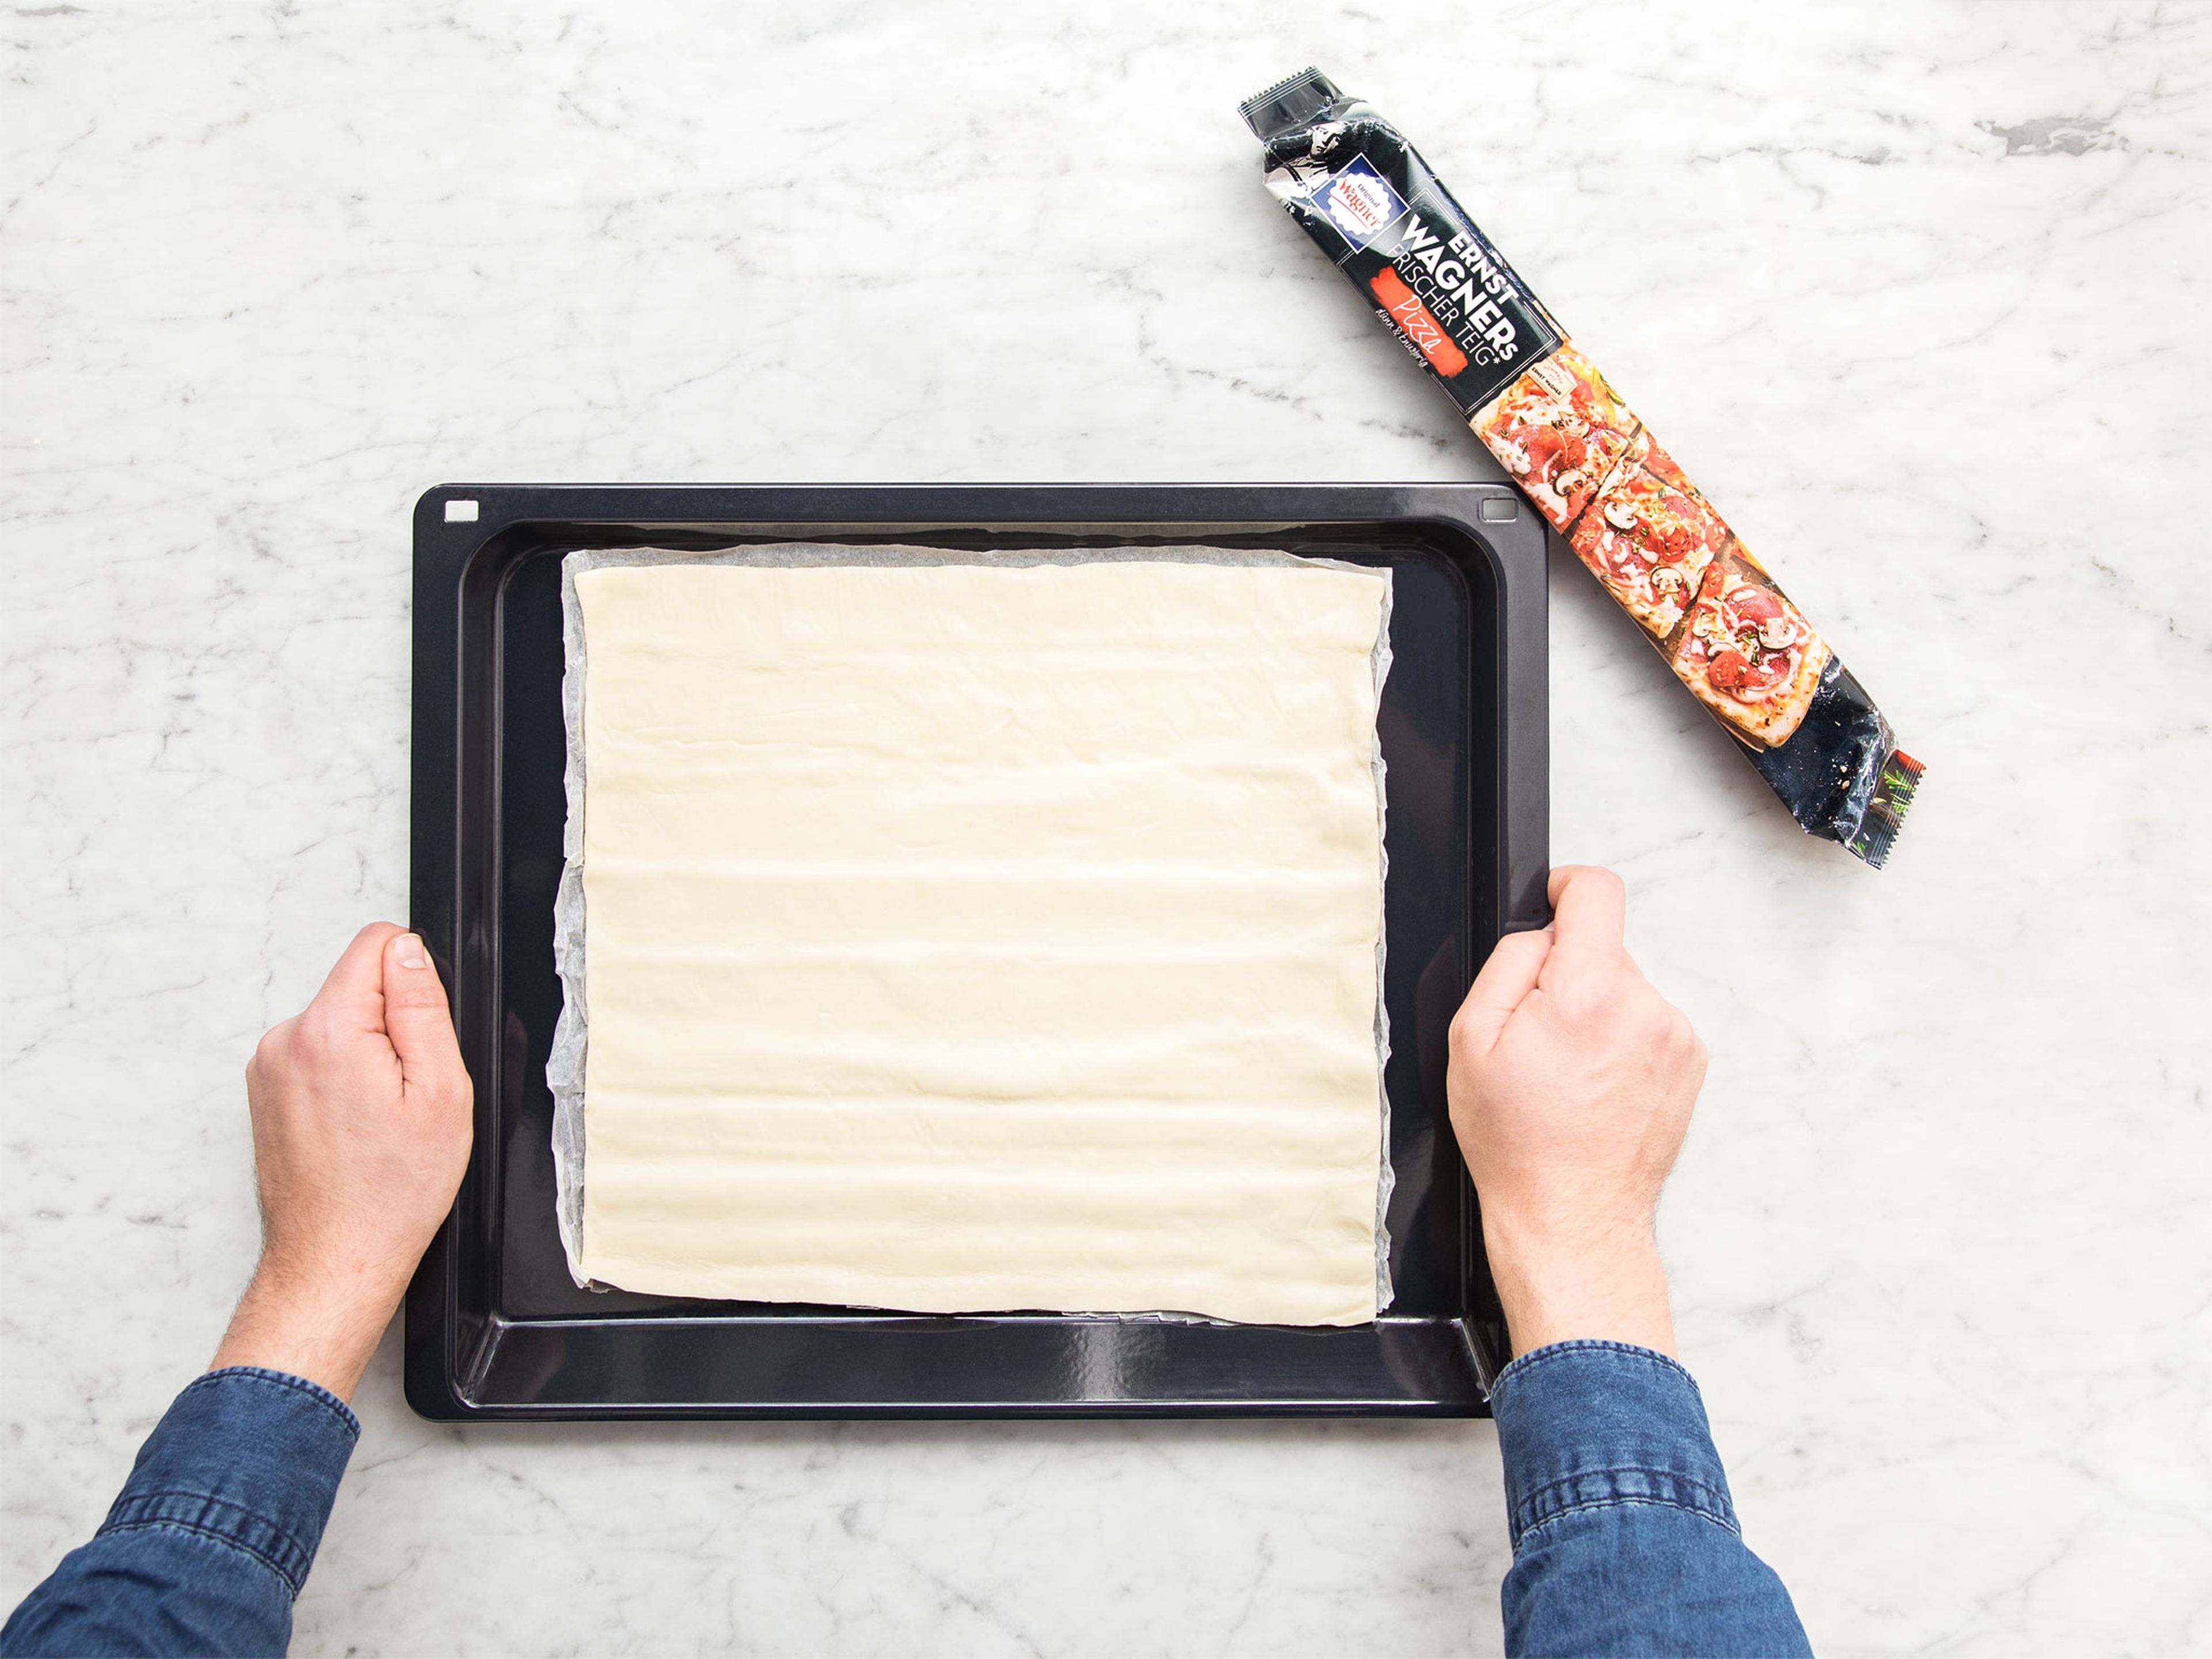 Preheat the oven to 210°C/410°F convection heat. Unfold pizza dough, transfer onto a baking sheet and pierce with a fork. Bake in the oven without any toppings for approx. 8 min., or until browned.